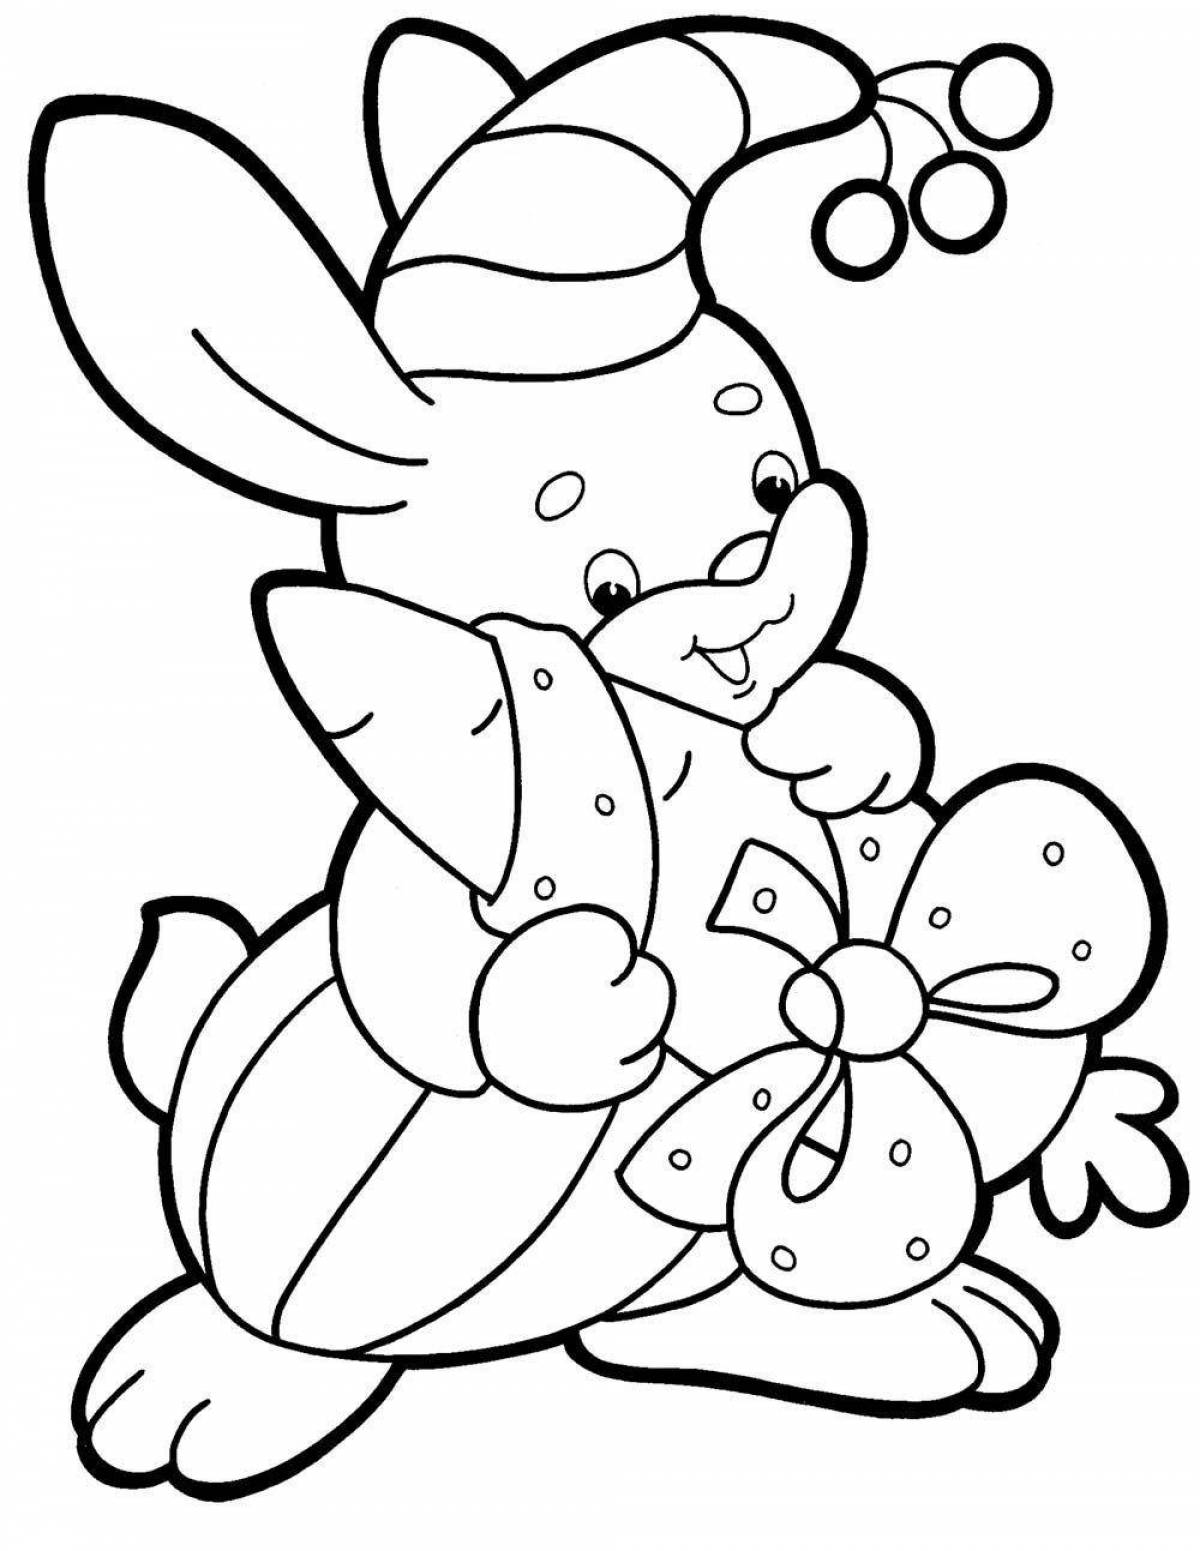 Fancy coloring bunny new year